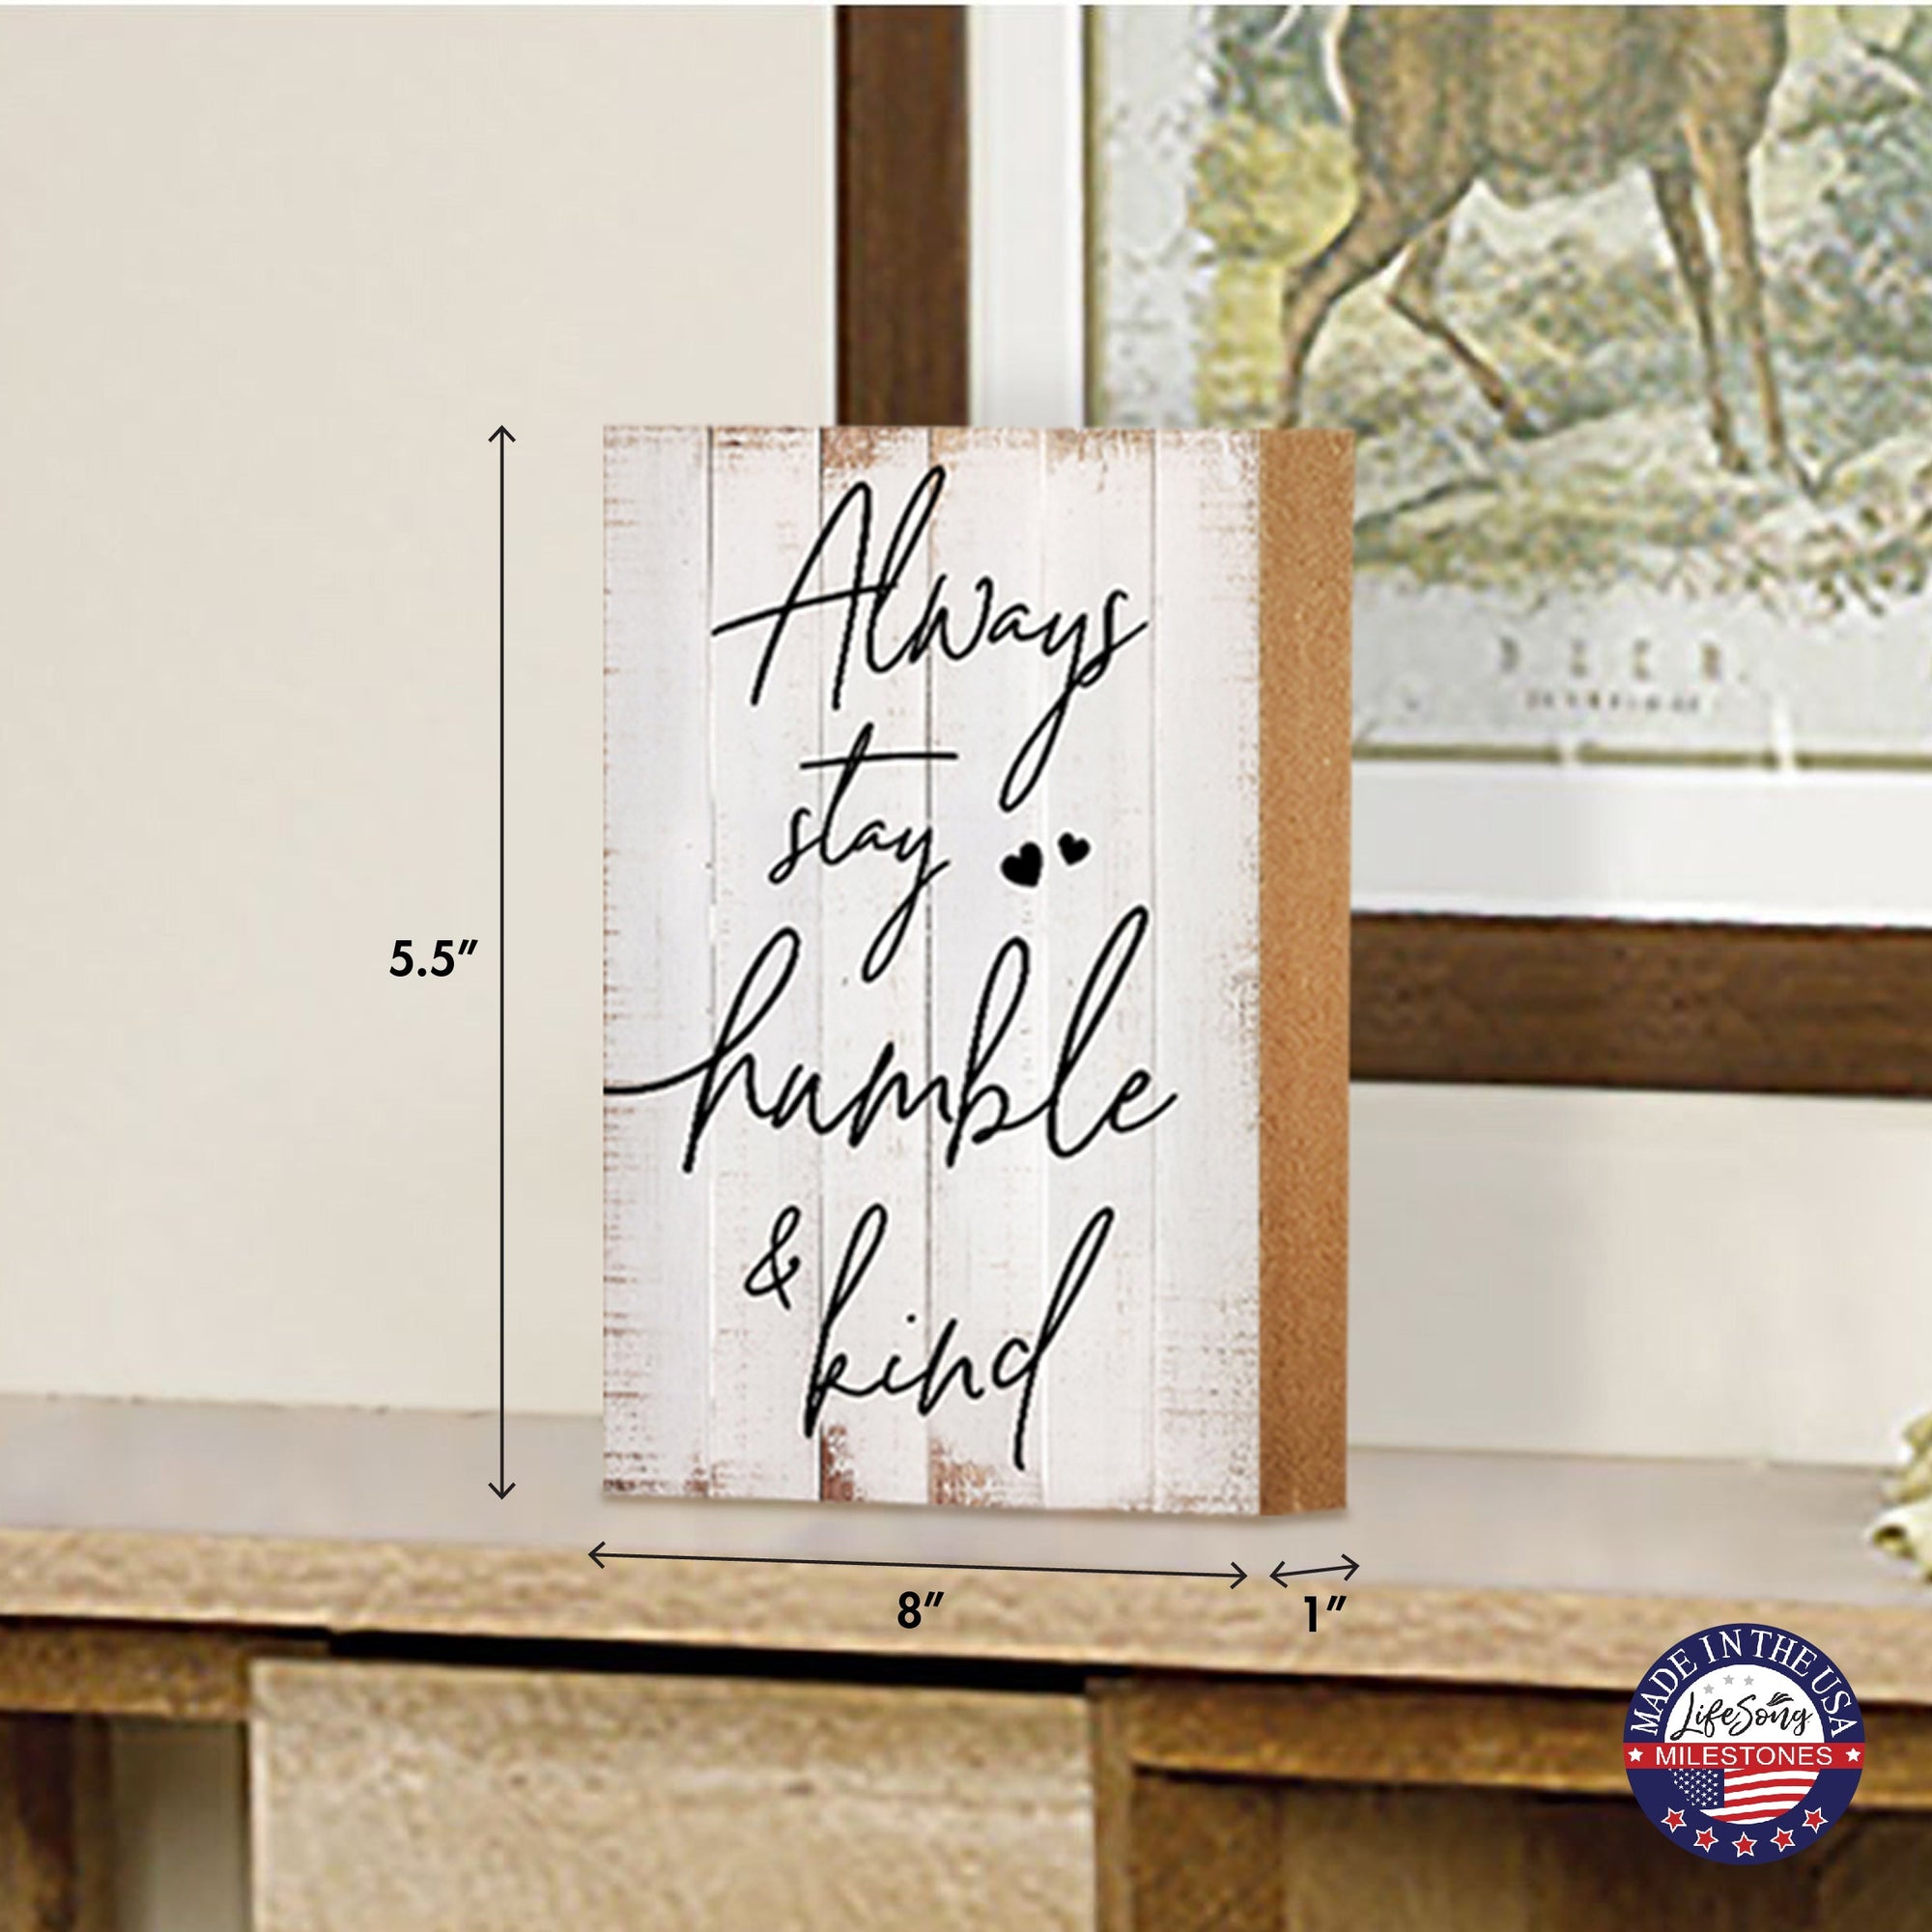 A wooden tabletop sign surrounded by delicate embellishments, making it a beautiful and meaningful addition to your home.